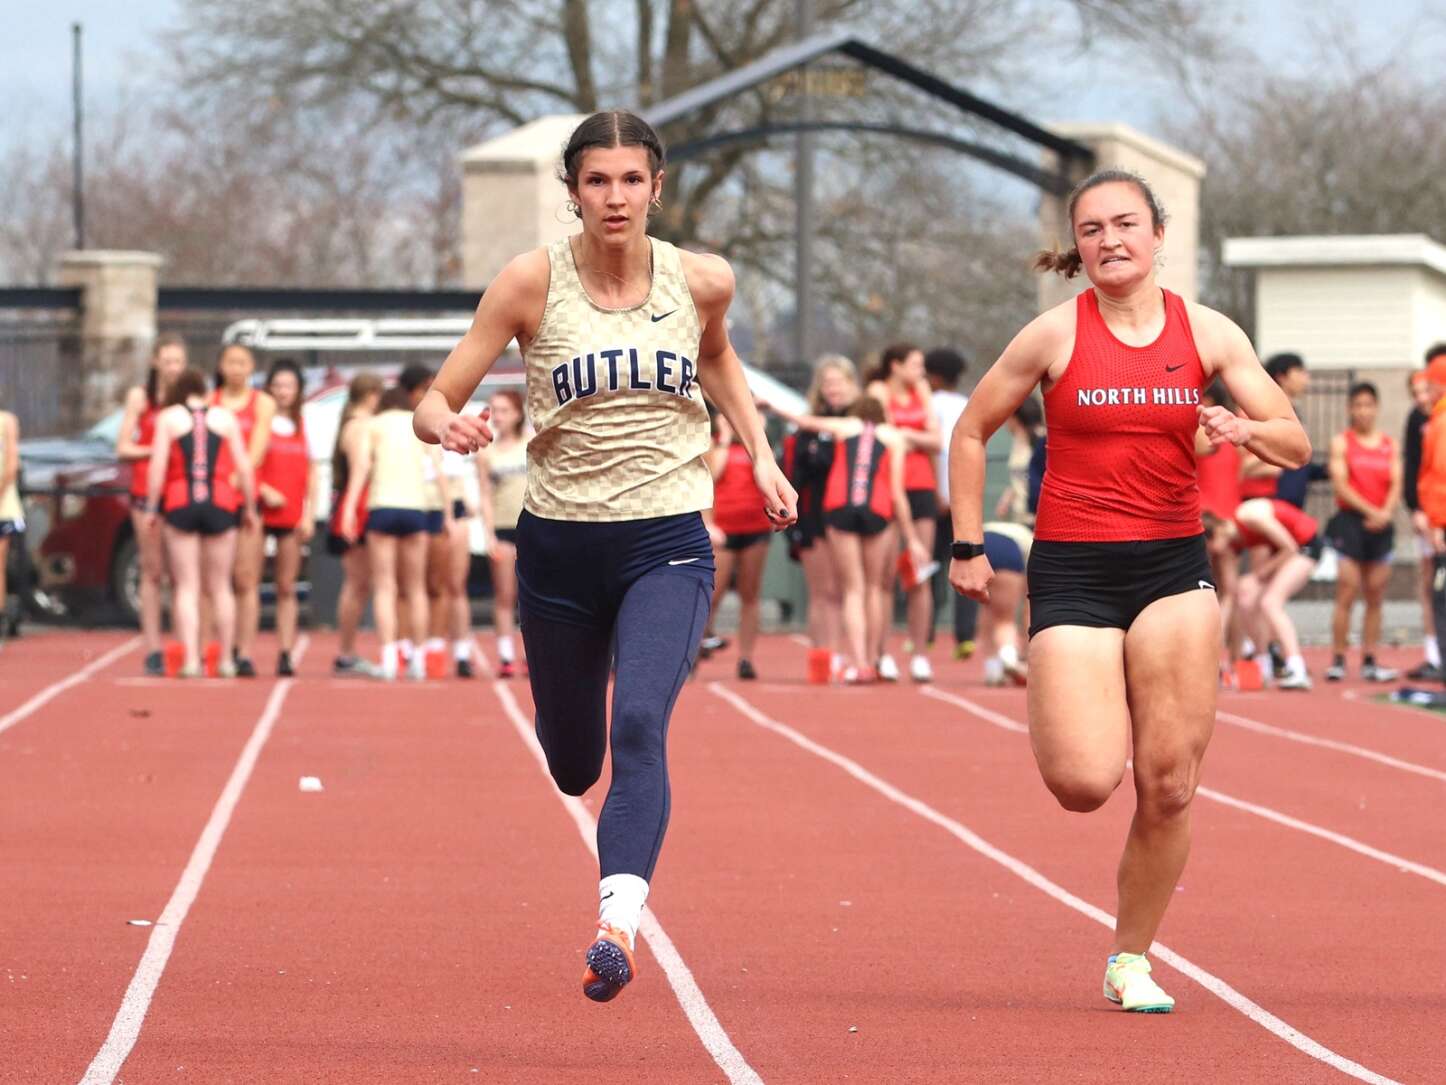 57th annual Butler Invitational featuring 60 teams this weekend